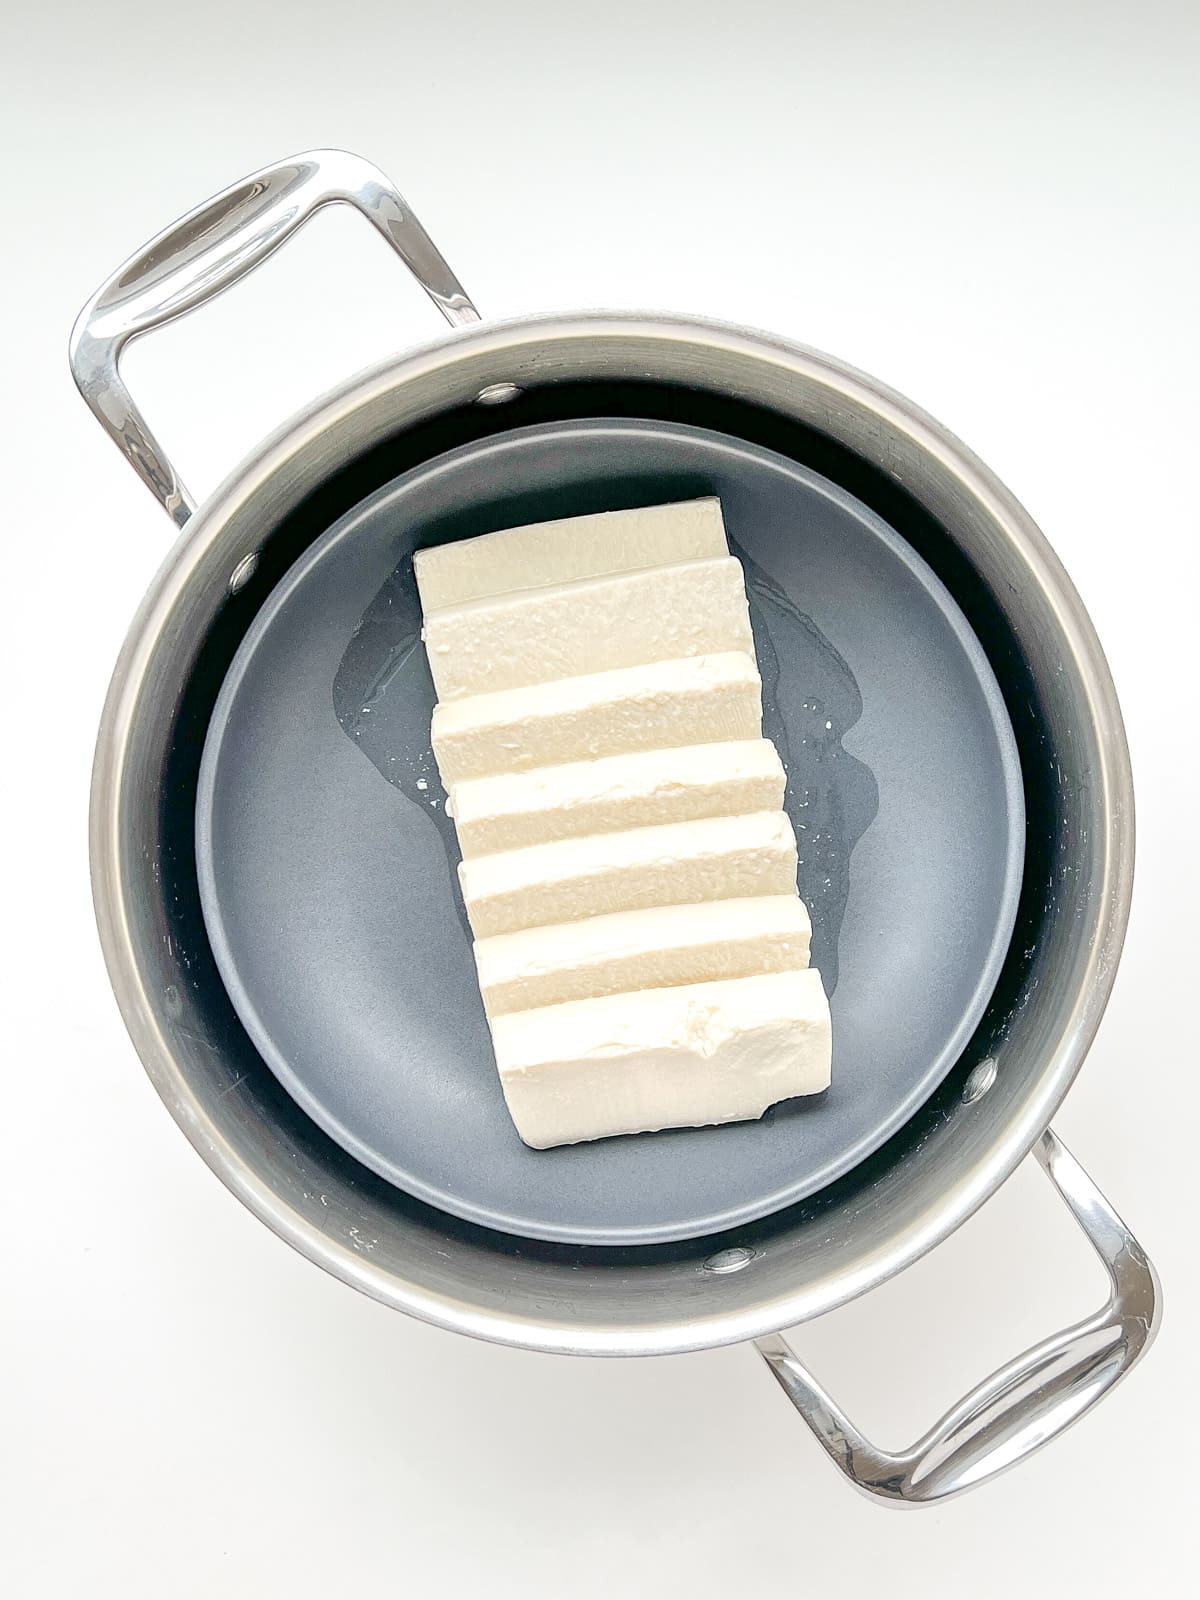 An image of a dish of sliced tofu inside a pot that will be used to steam the tofu.